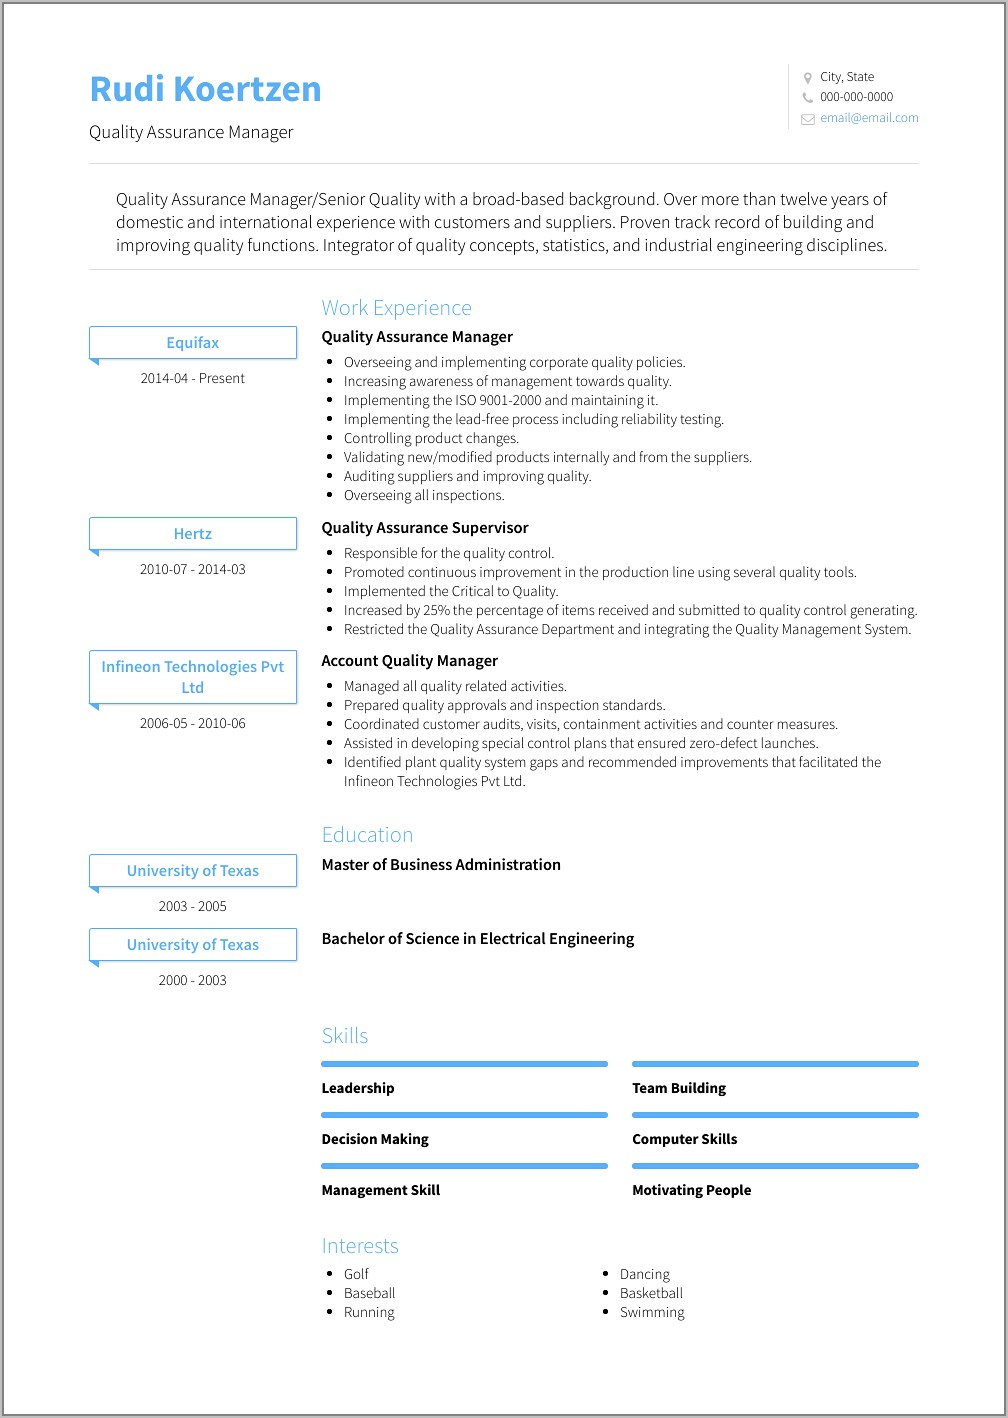 Quality Assurance Manager Resume